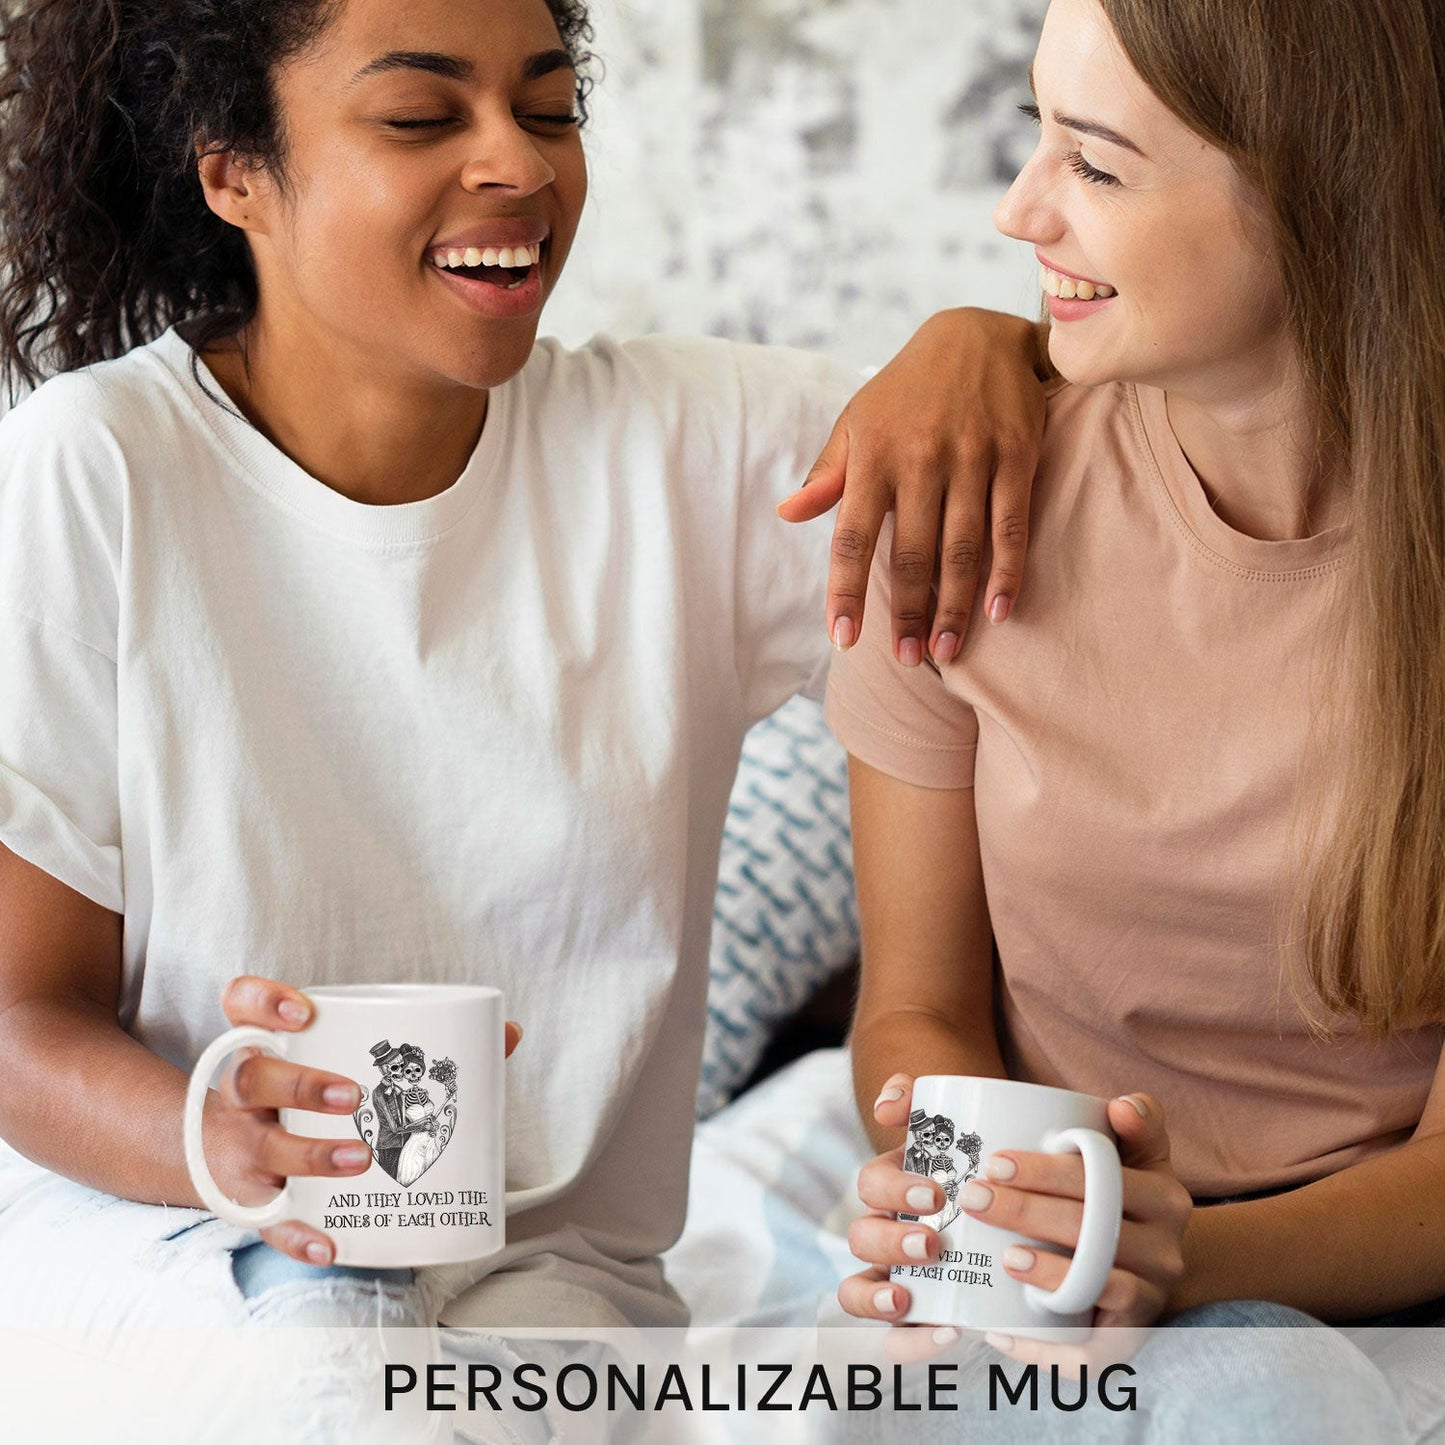 Love The Bones Of Each Other - Personalized Anniversary or Halloween gift for Boyfriend or Girlfriend - Custom Mug - MyMindfulGifts